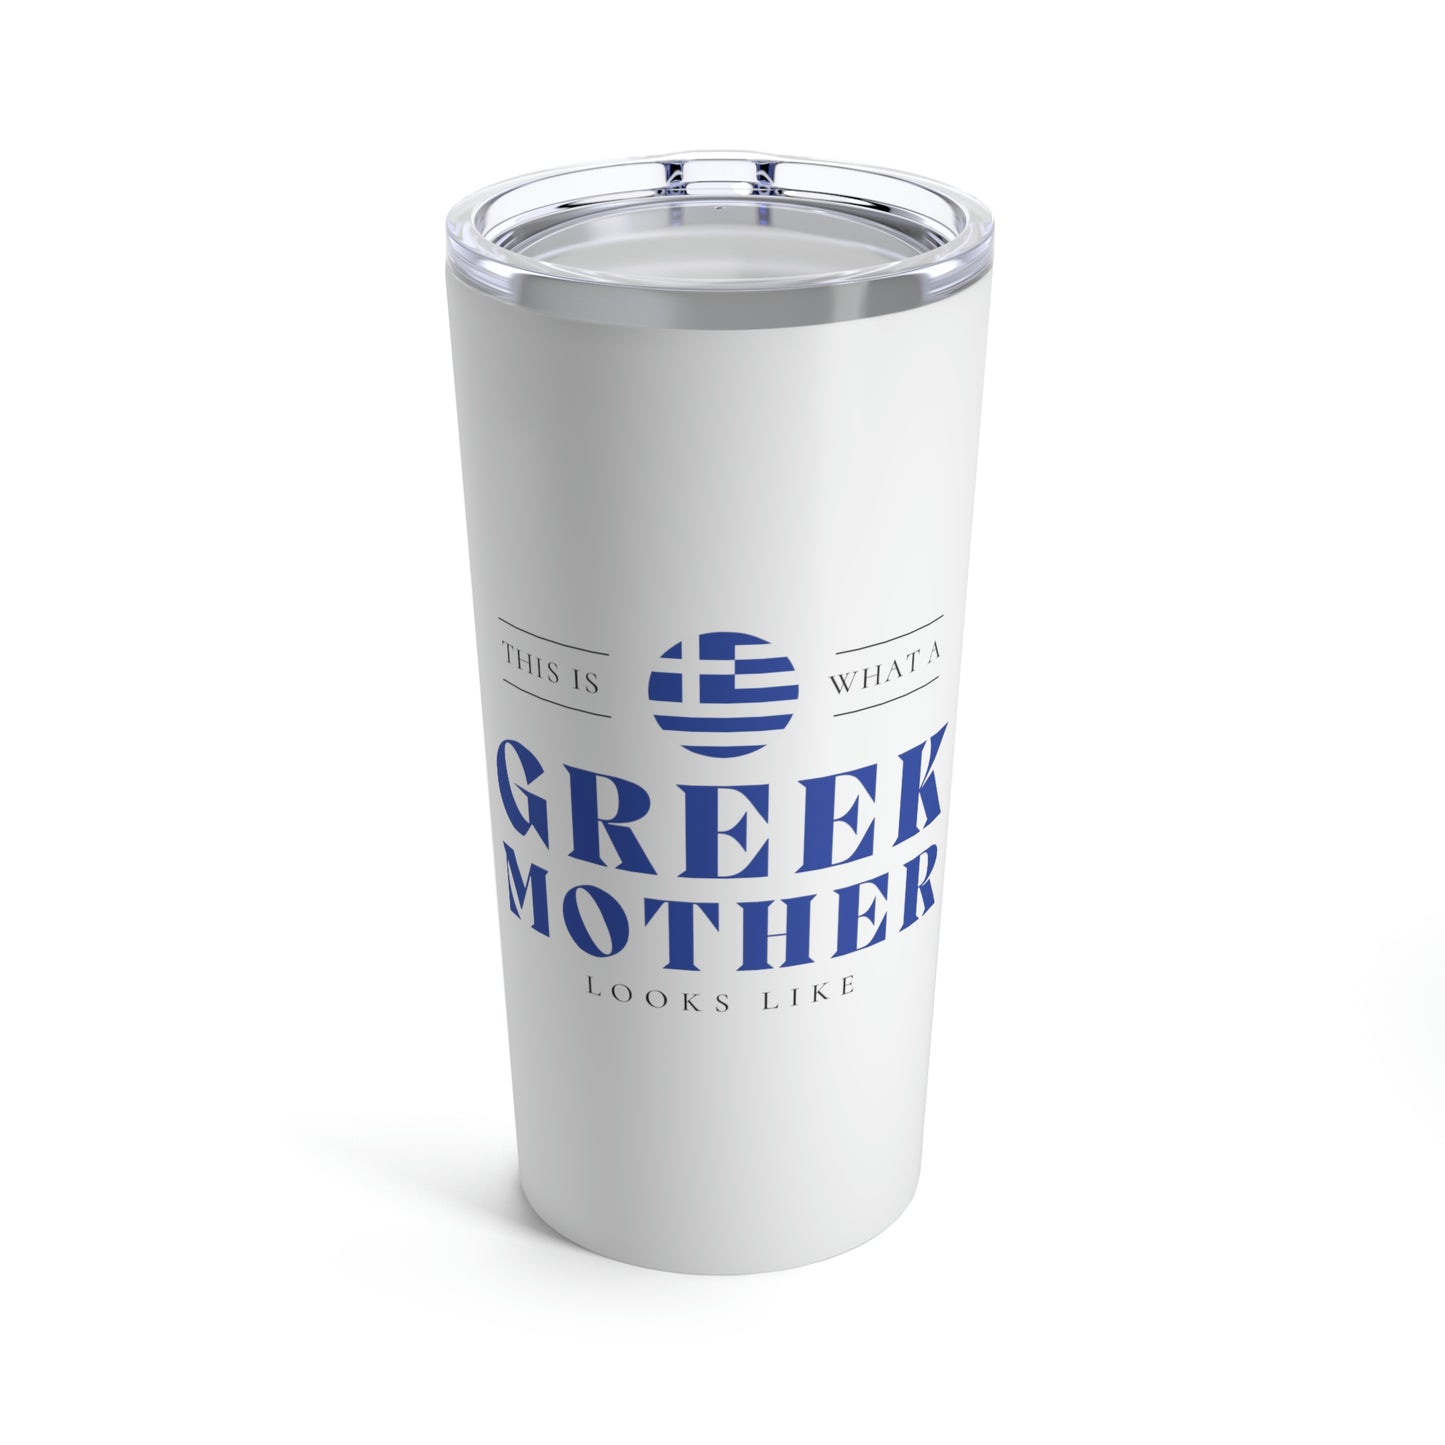 Greek Mother Looks Like Mothers Day Greece Tumbler 20oz Beverage Container